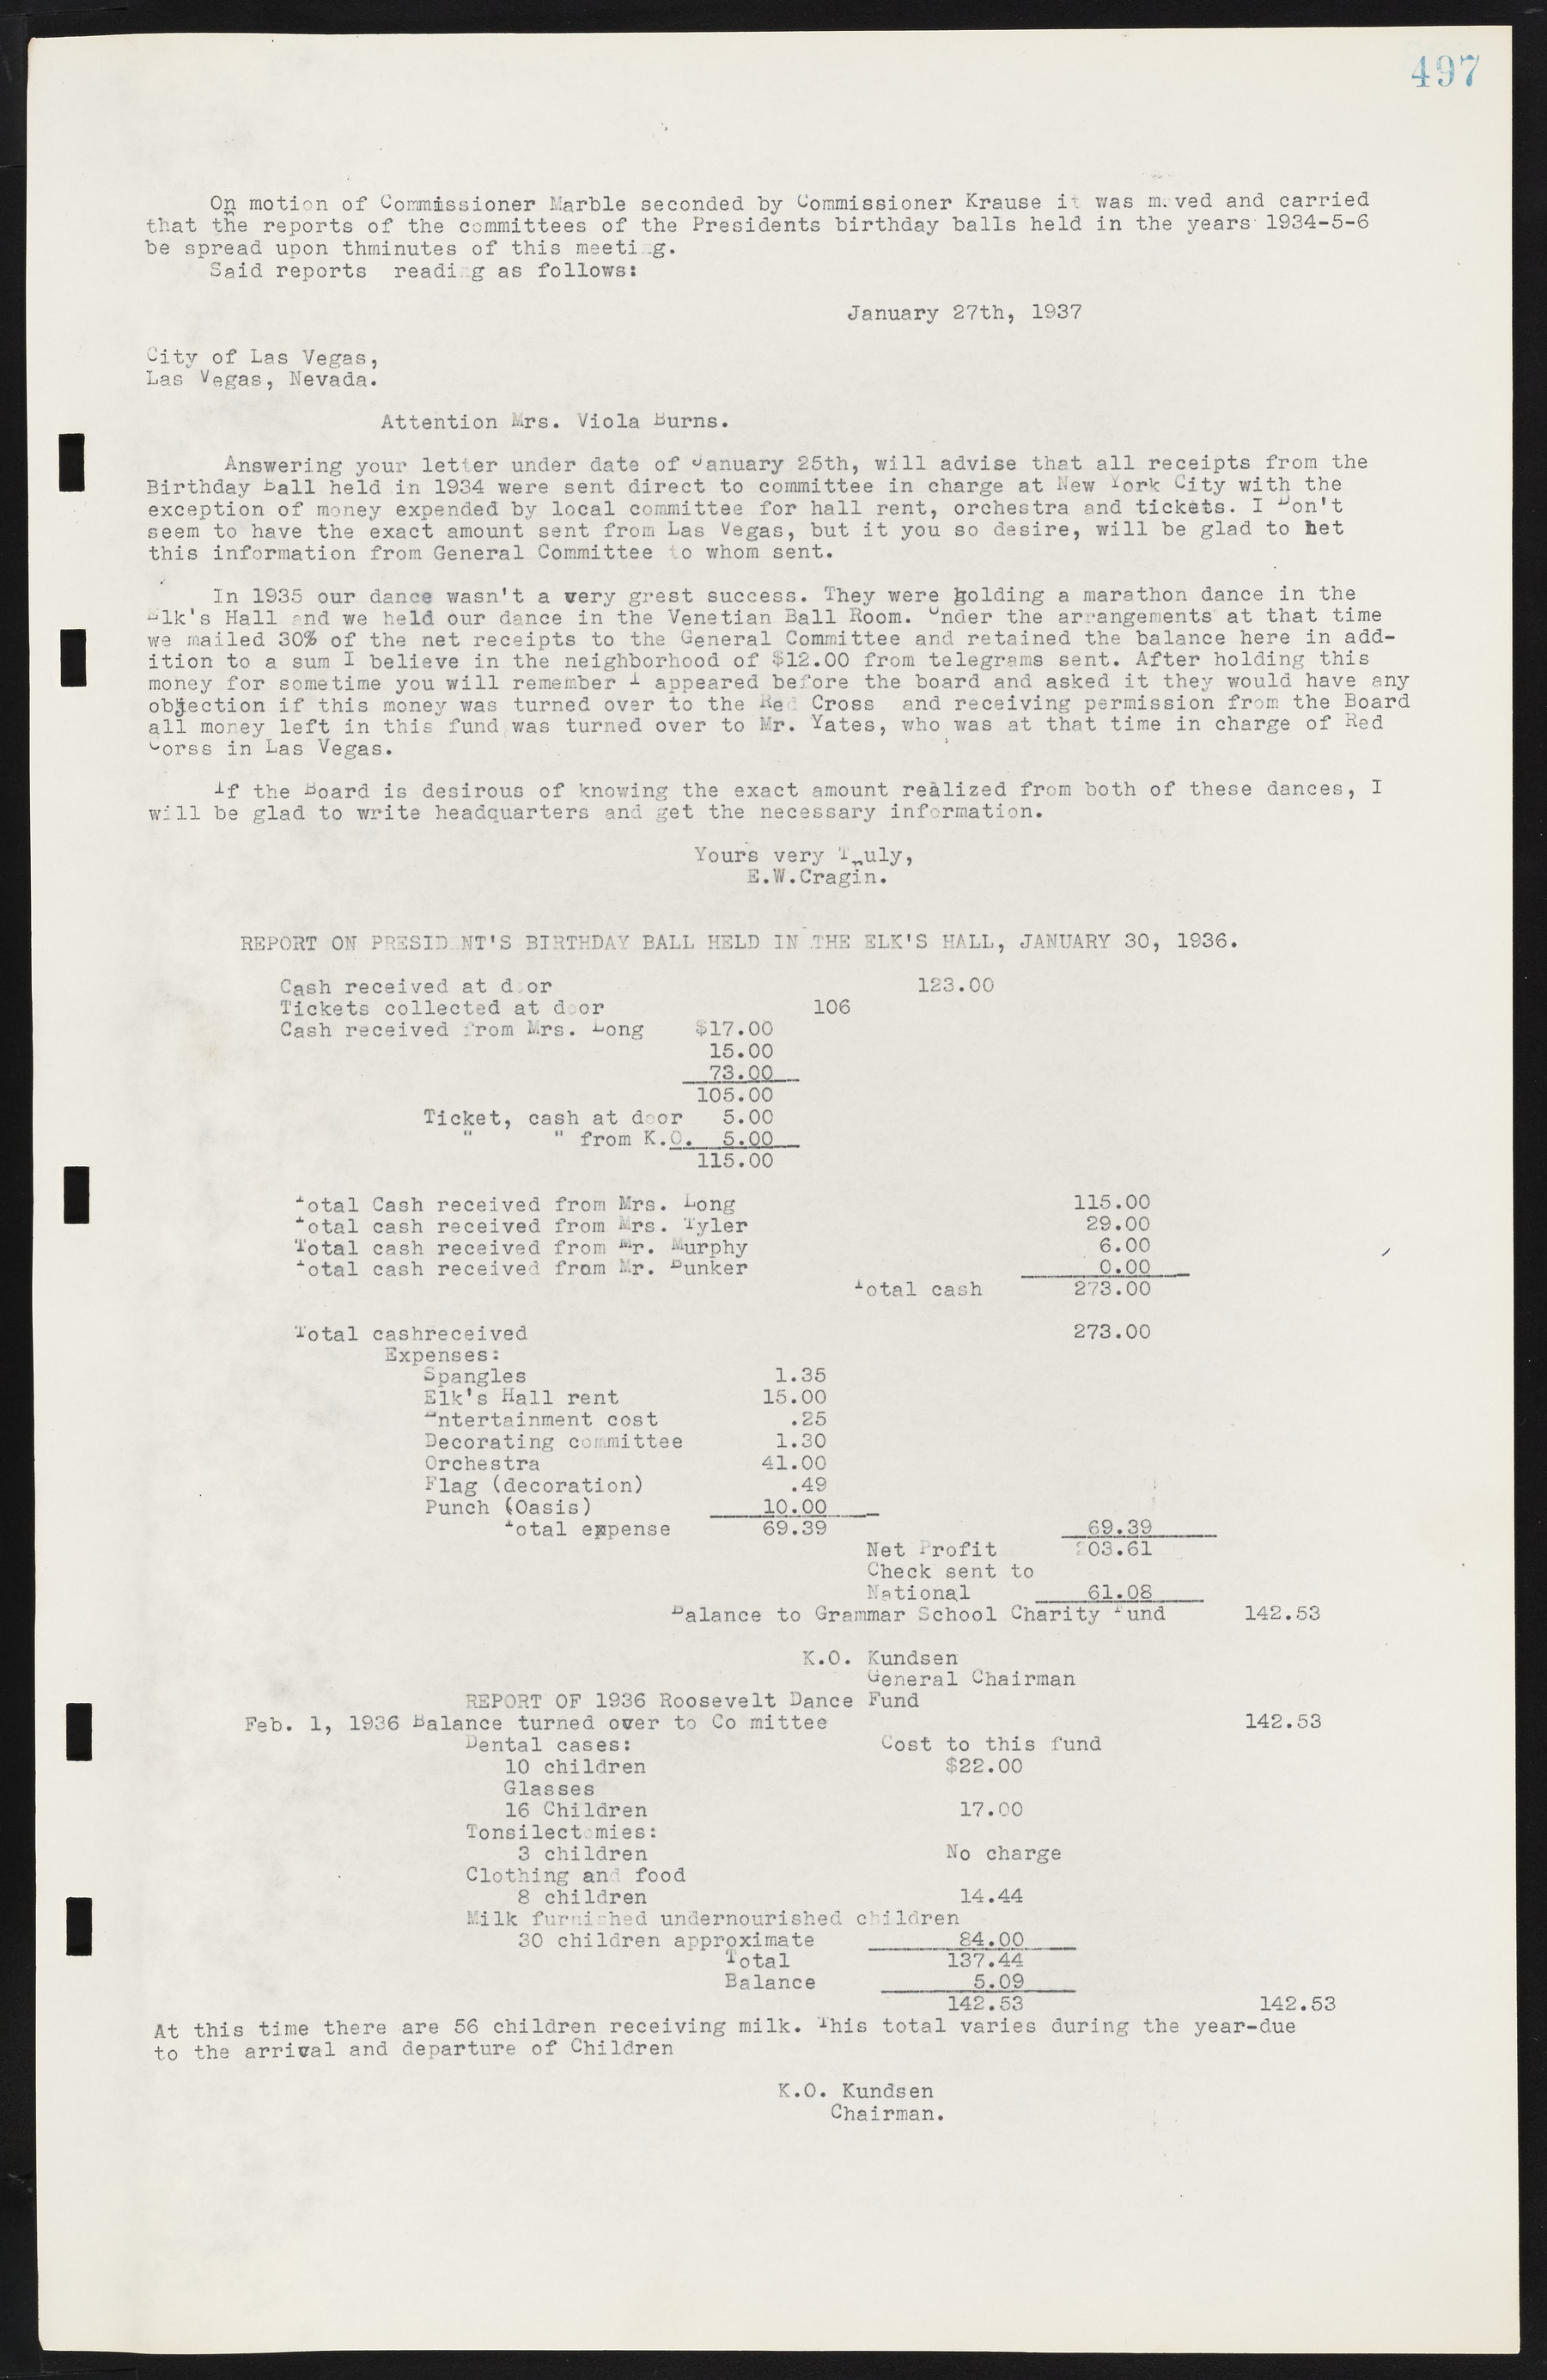 Las Vegas City Commission Minutes, May 14, 1929 to February 11, 1937, lvc000003-504